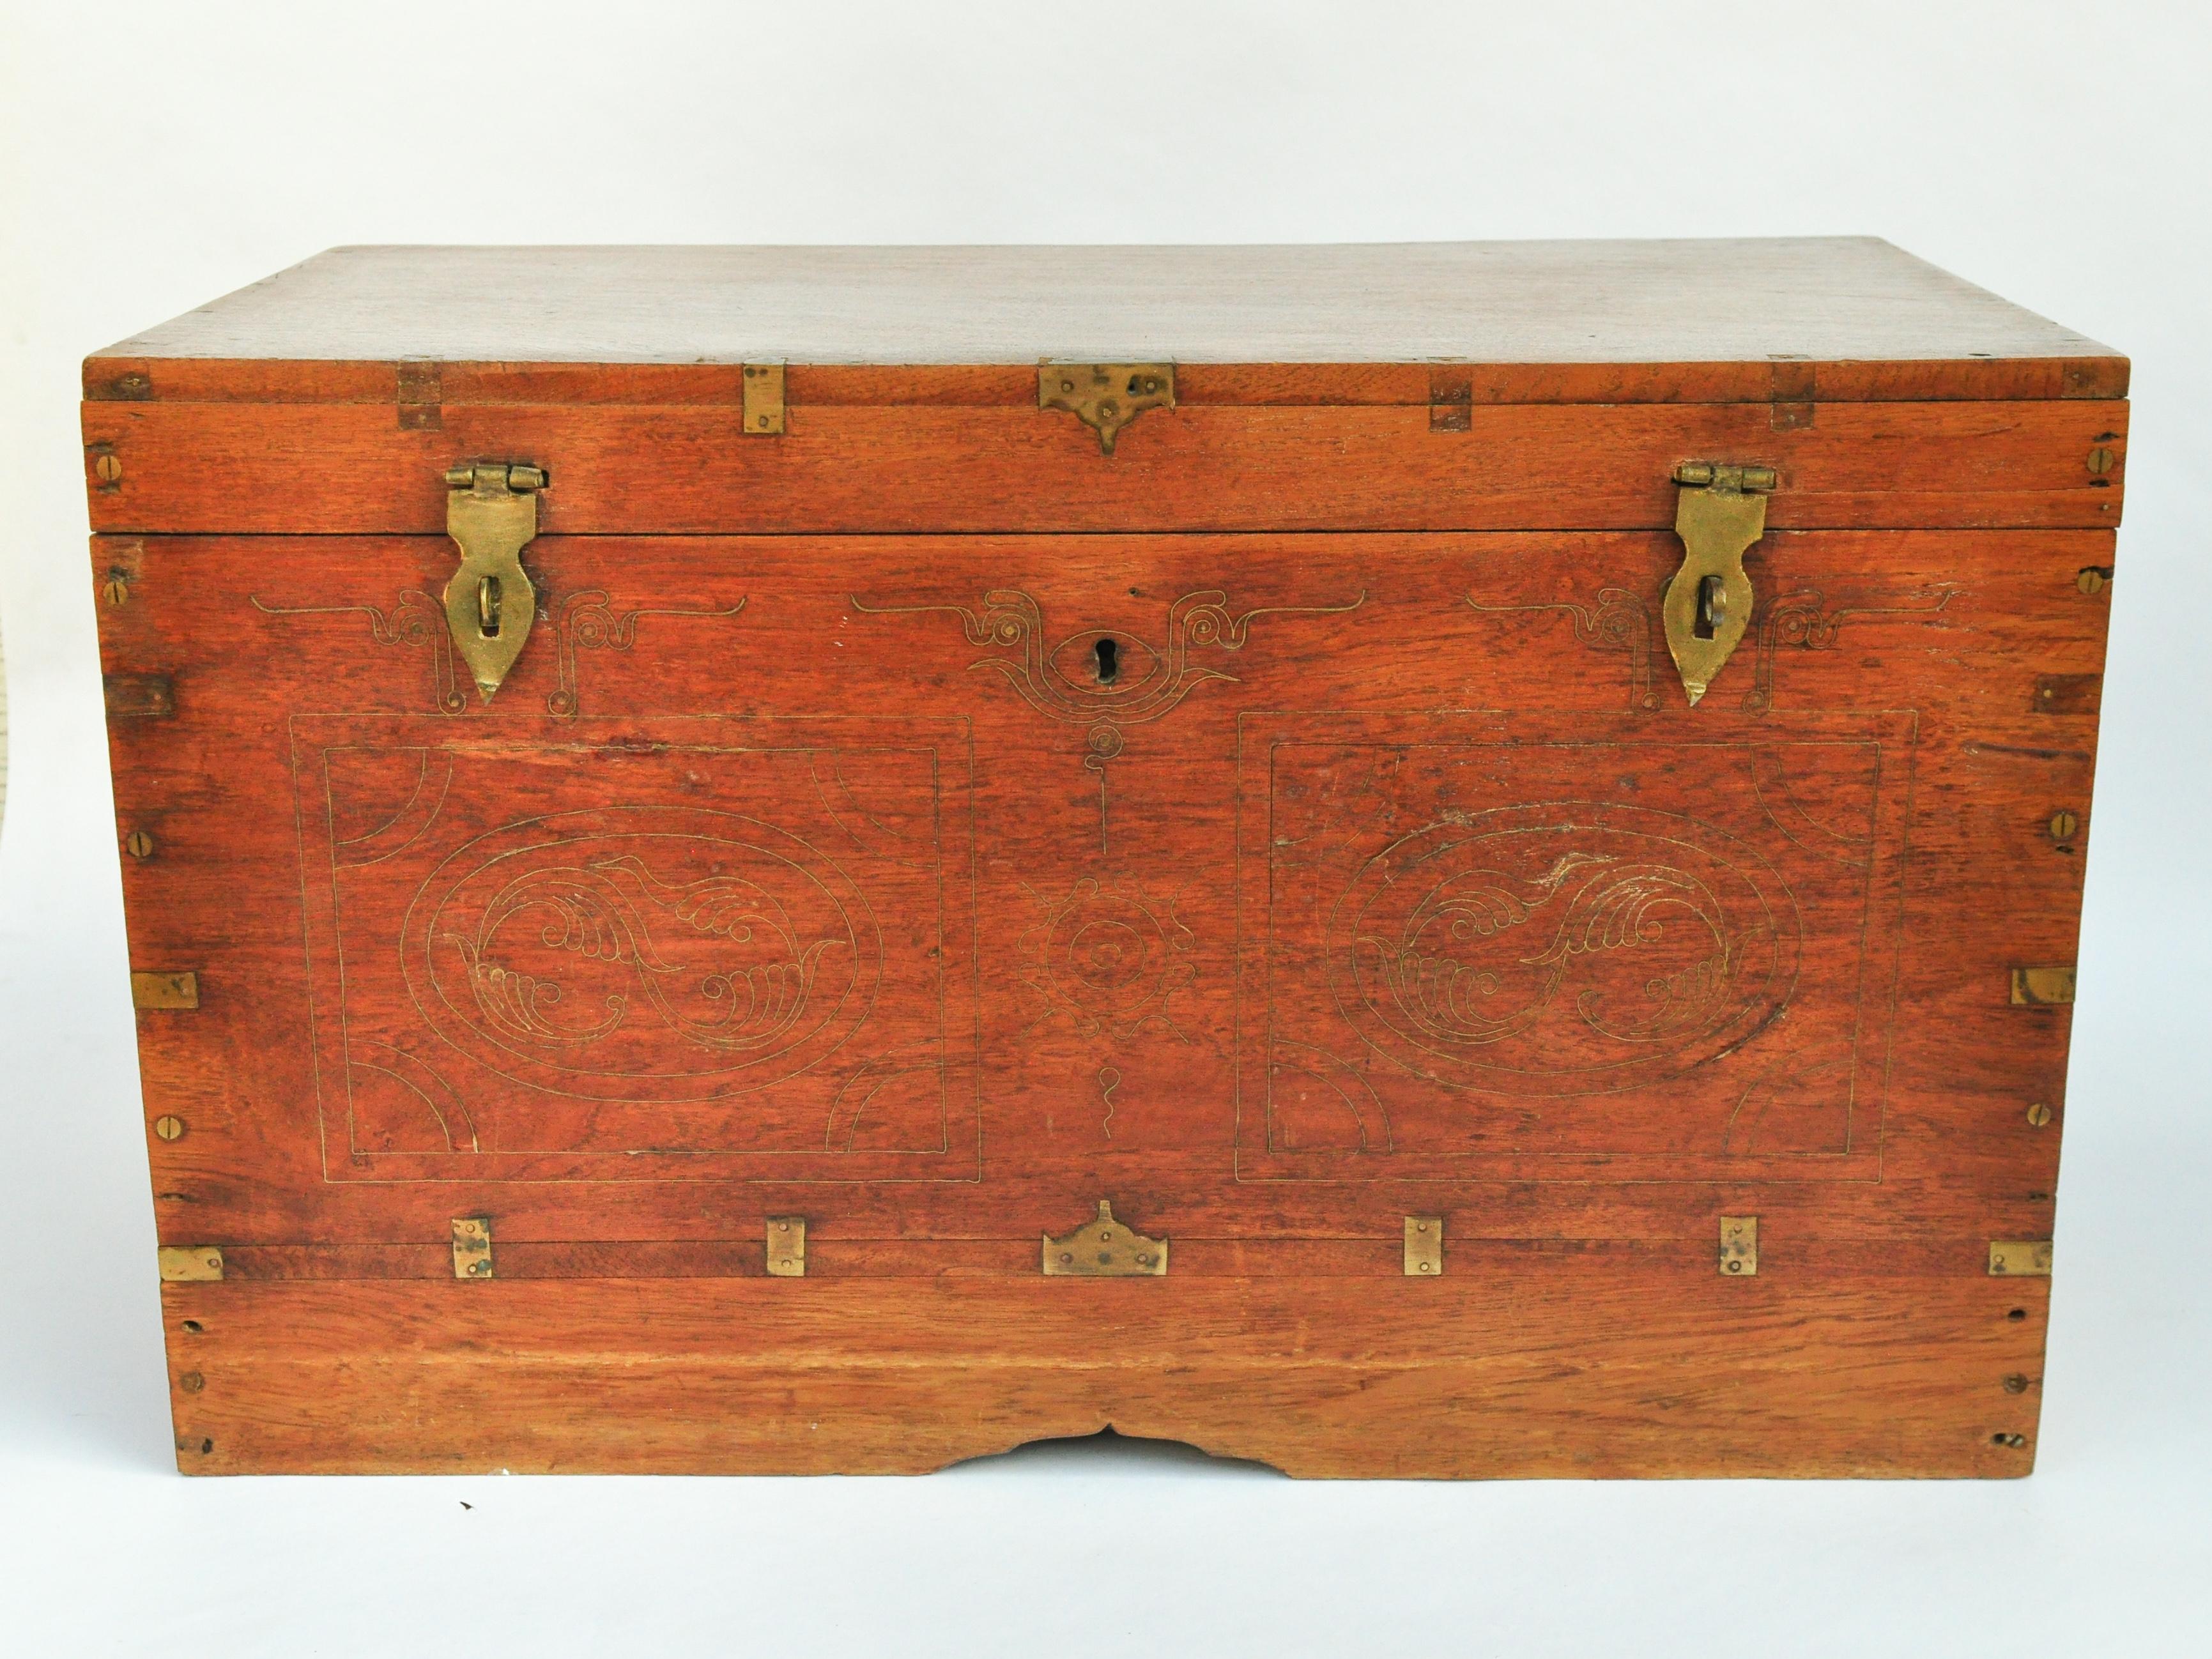 Vintage Teak Actors Chest from Burma. Early to Mid-20th Century
This chest traditionally would have been used by an actor in a traveling troop of performers, to store costumes, accessories and make up. From the outside, it presents a simple